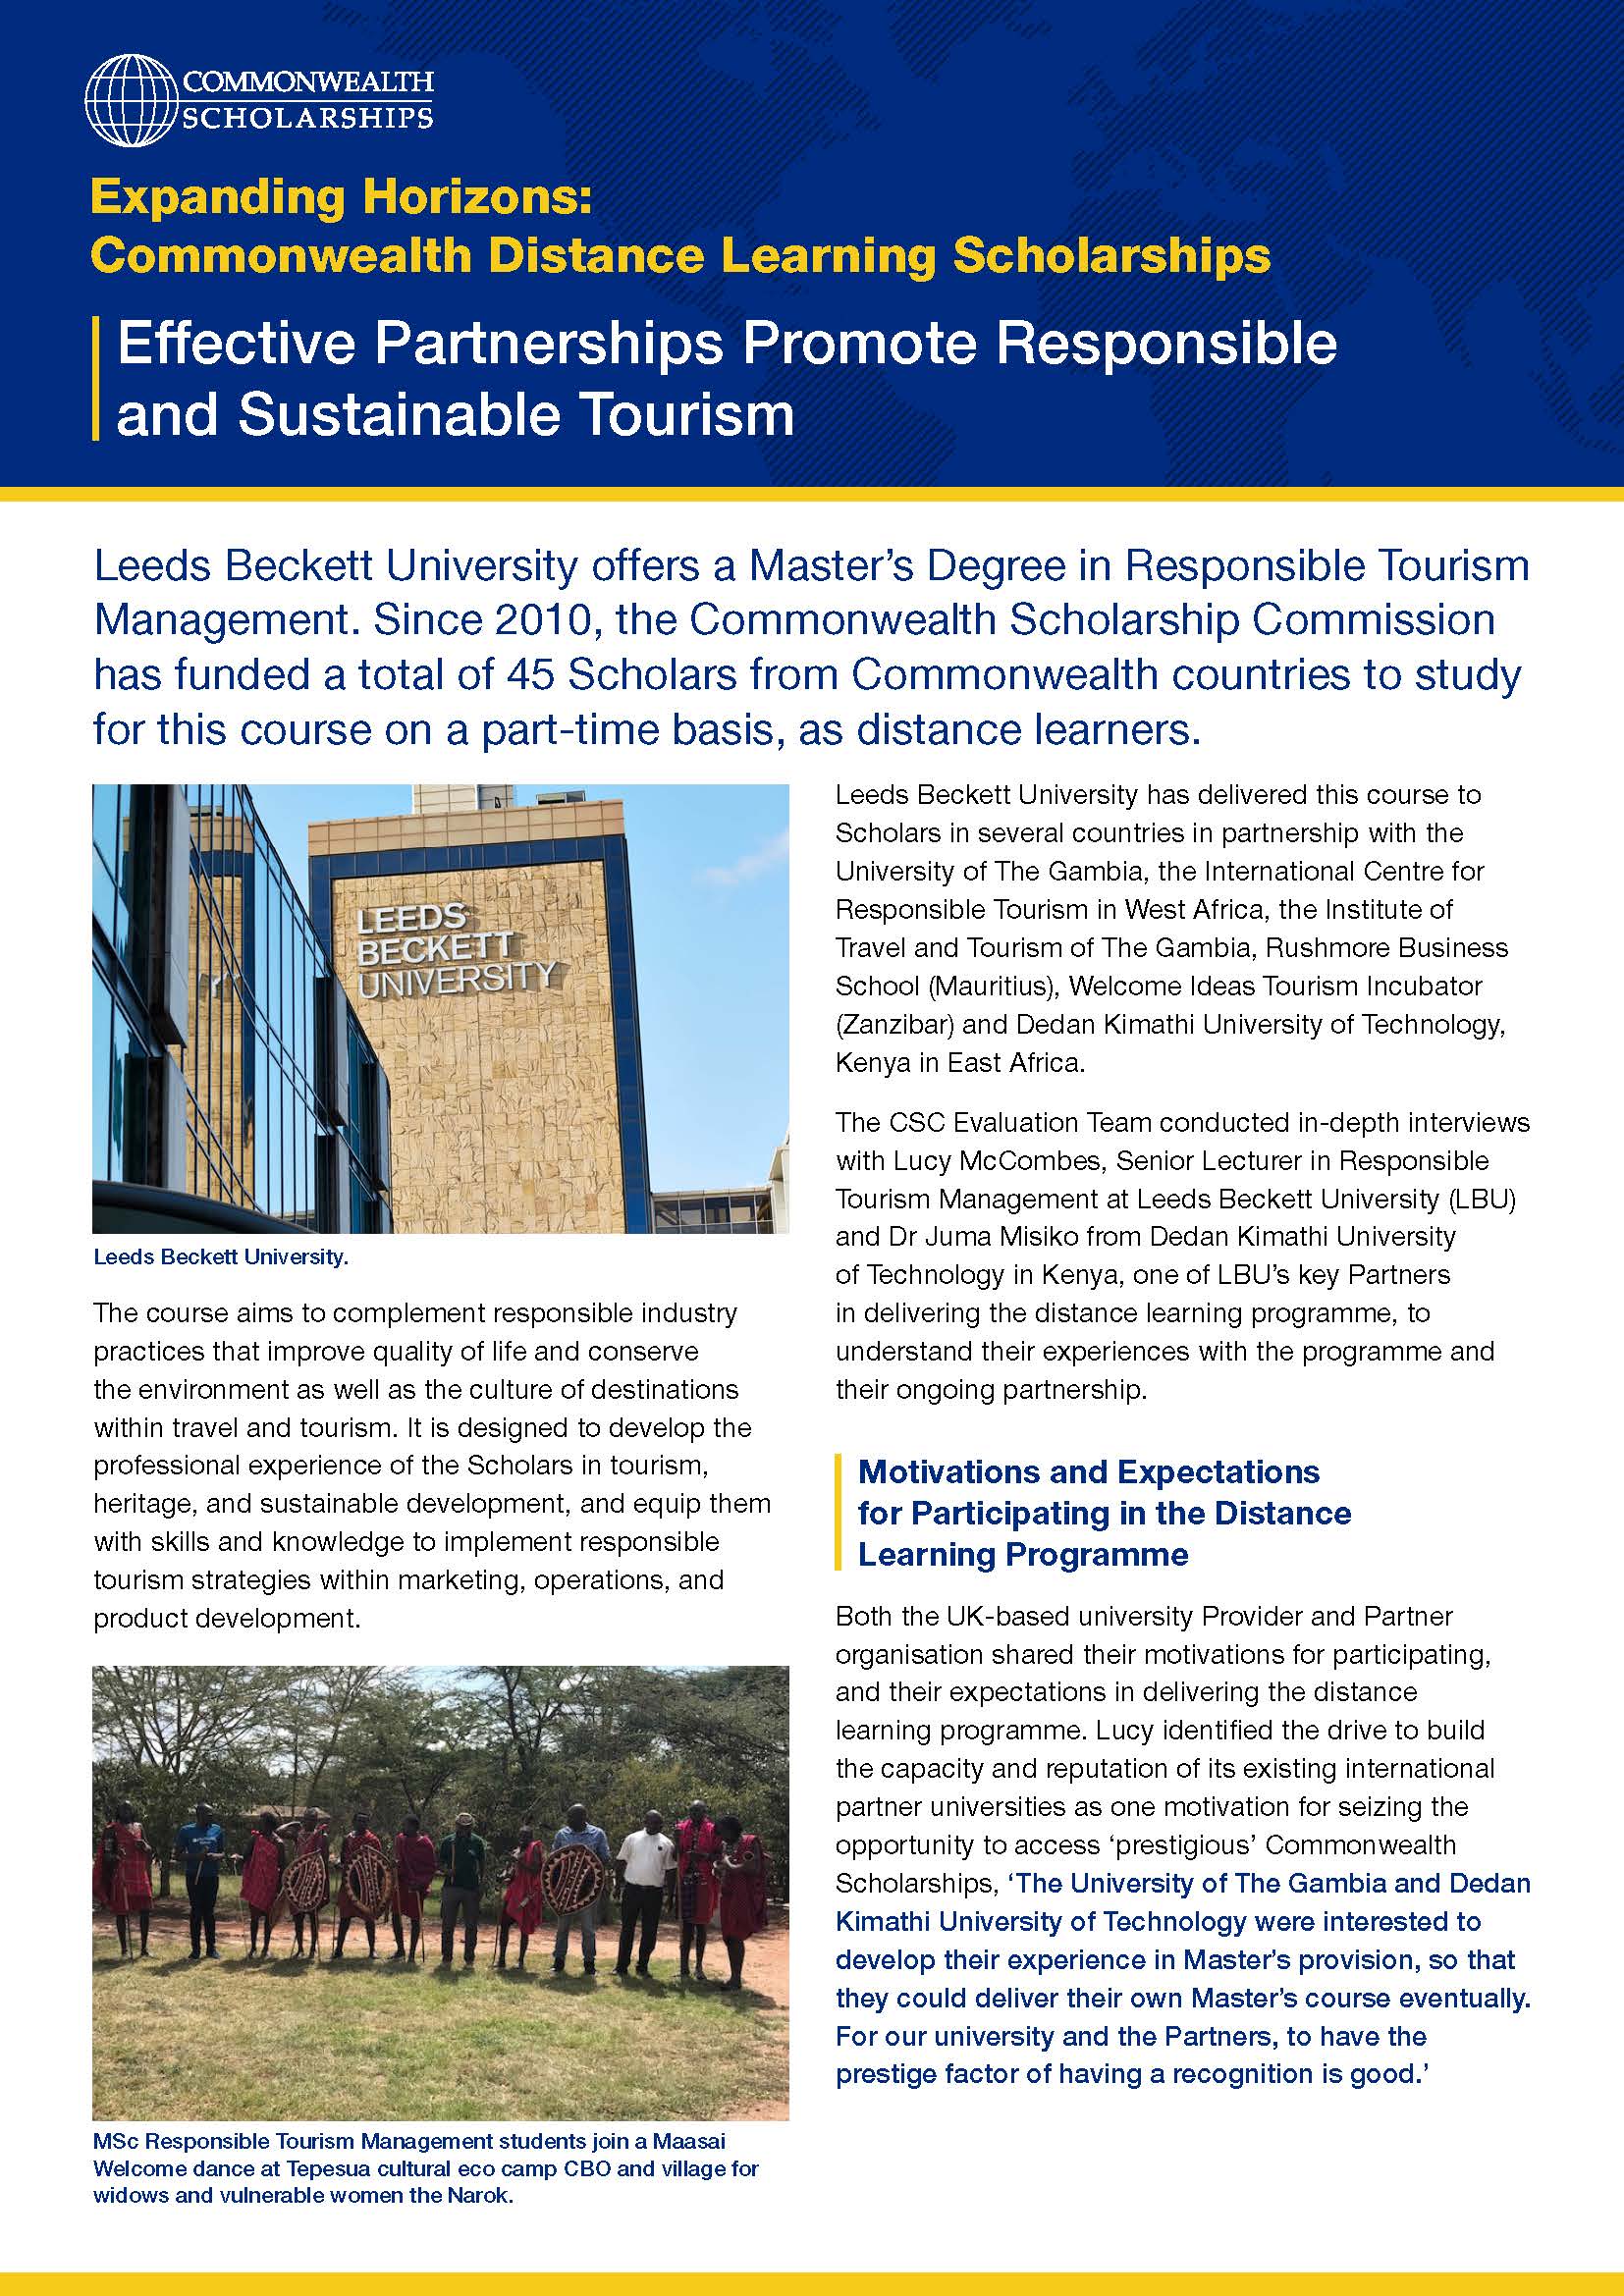 Effective Partnerships Promote Responsible and Sustainable Tourism Screenshot